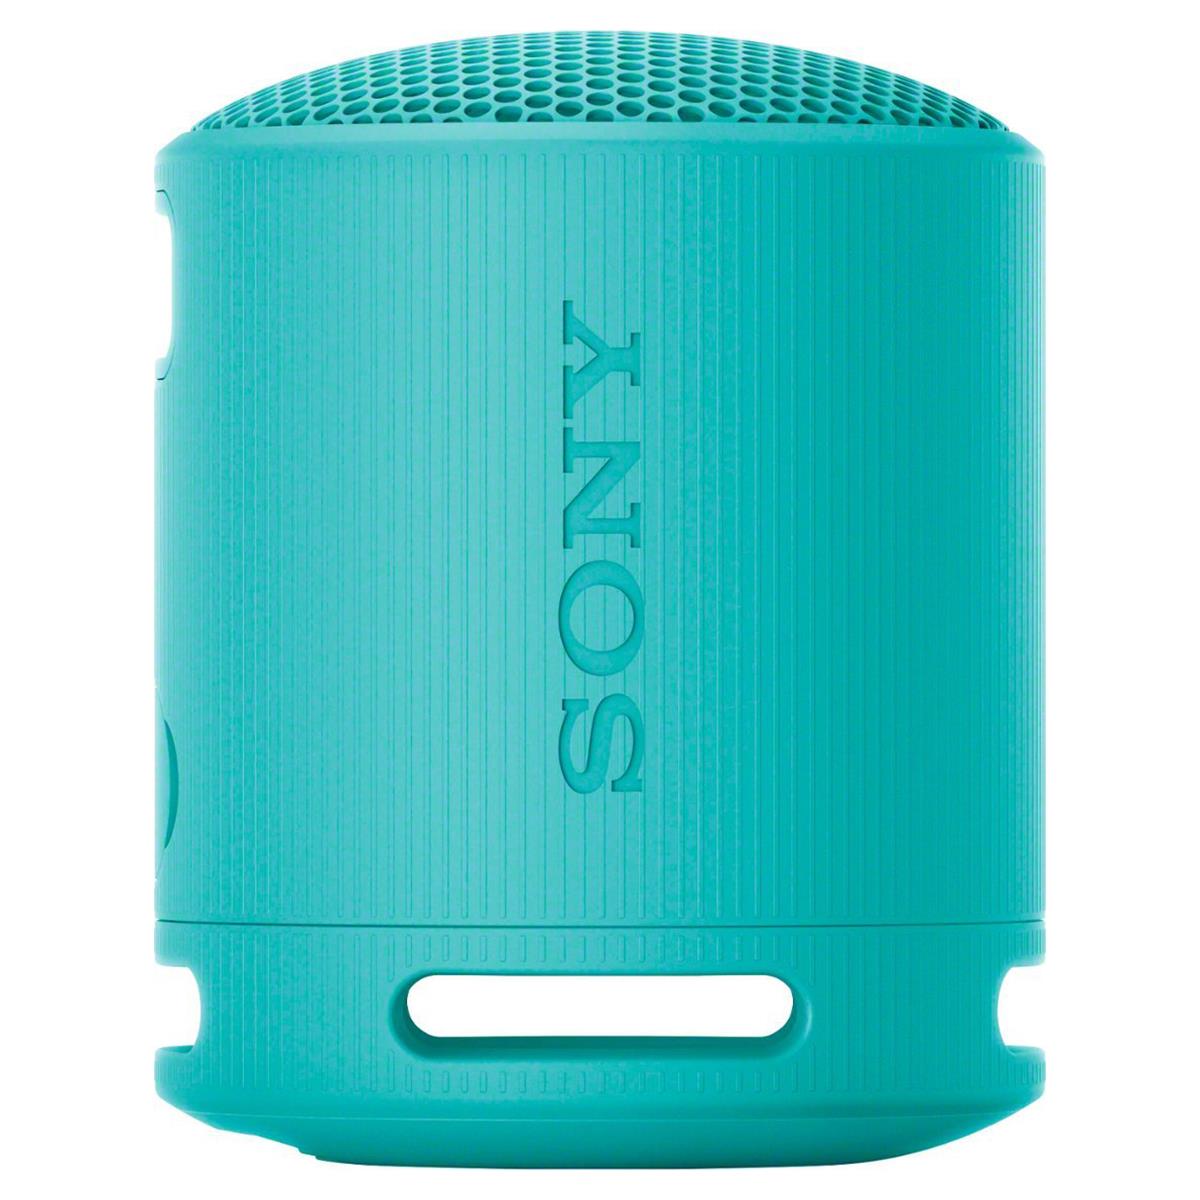 Image of Sony SRS-XB100 Compact Bluetooth Speaker